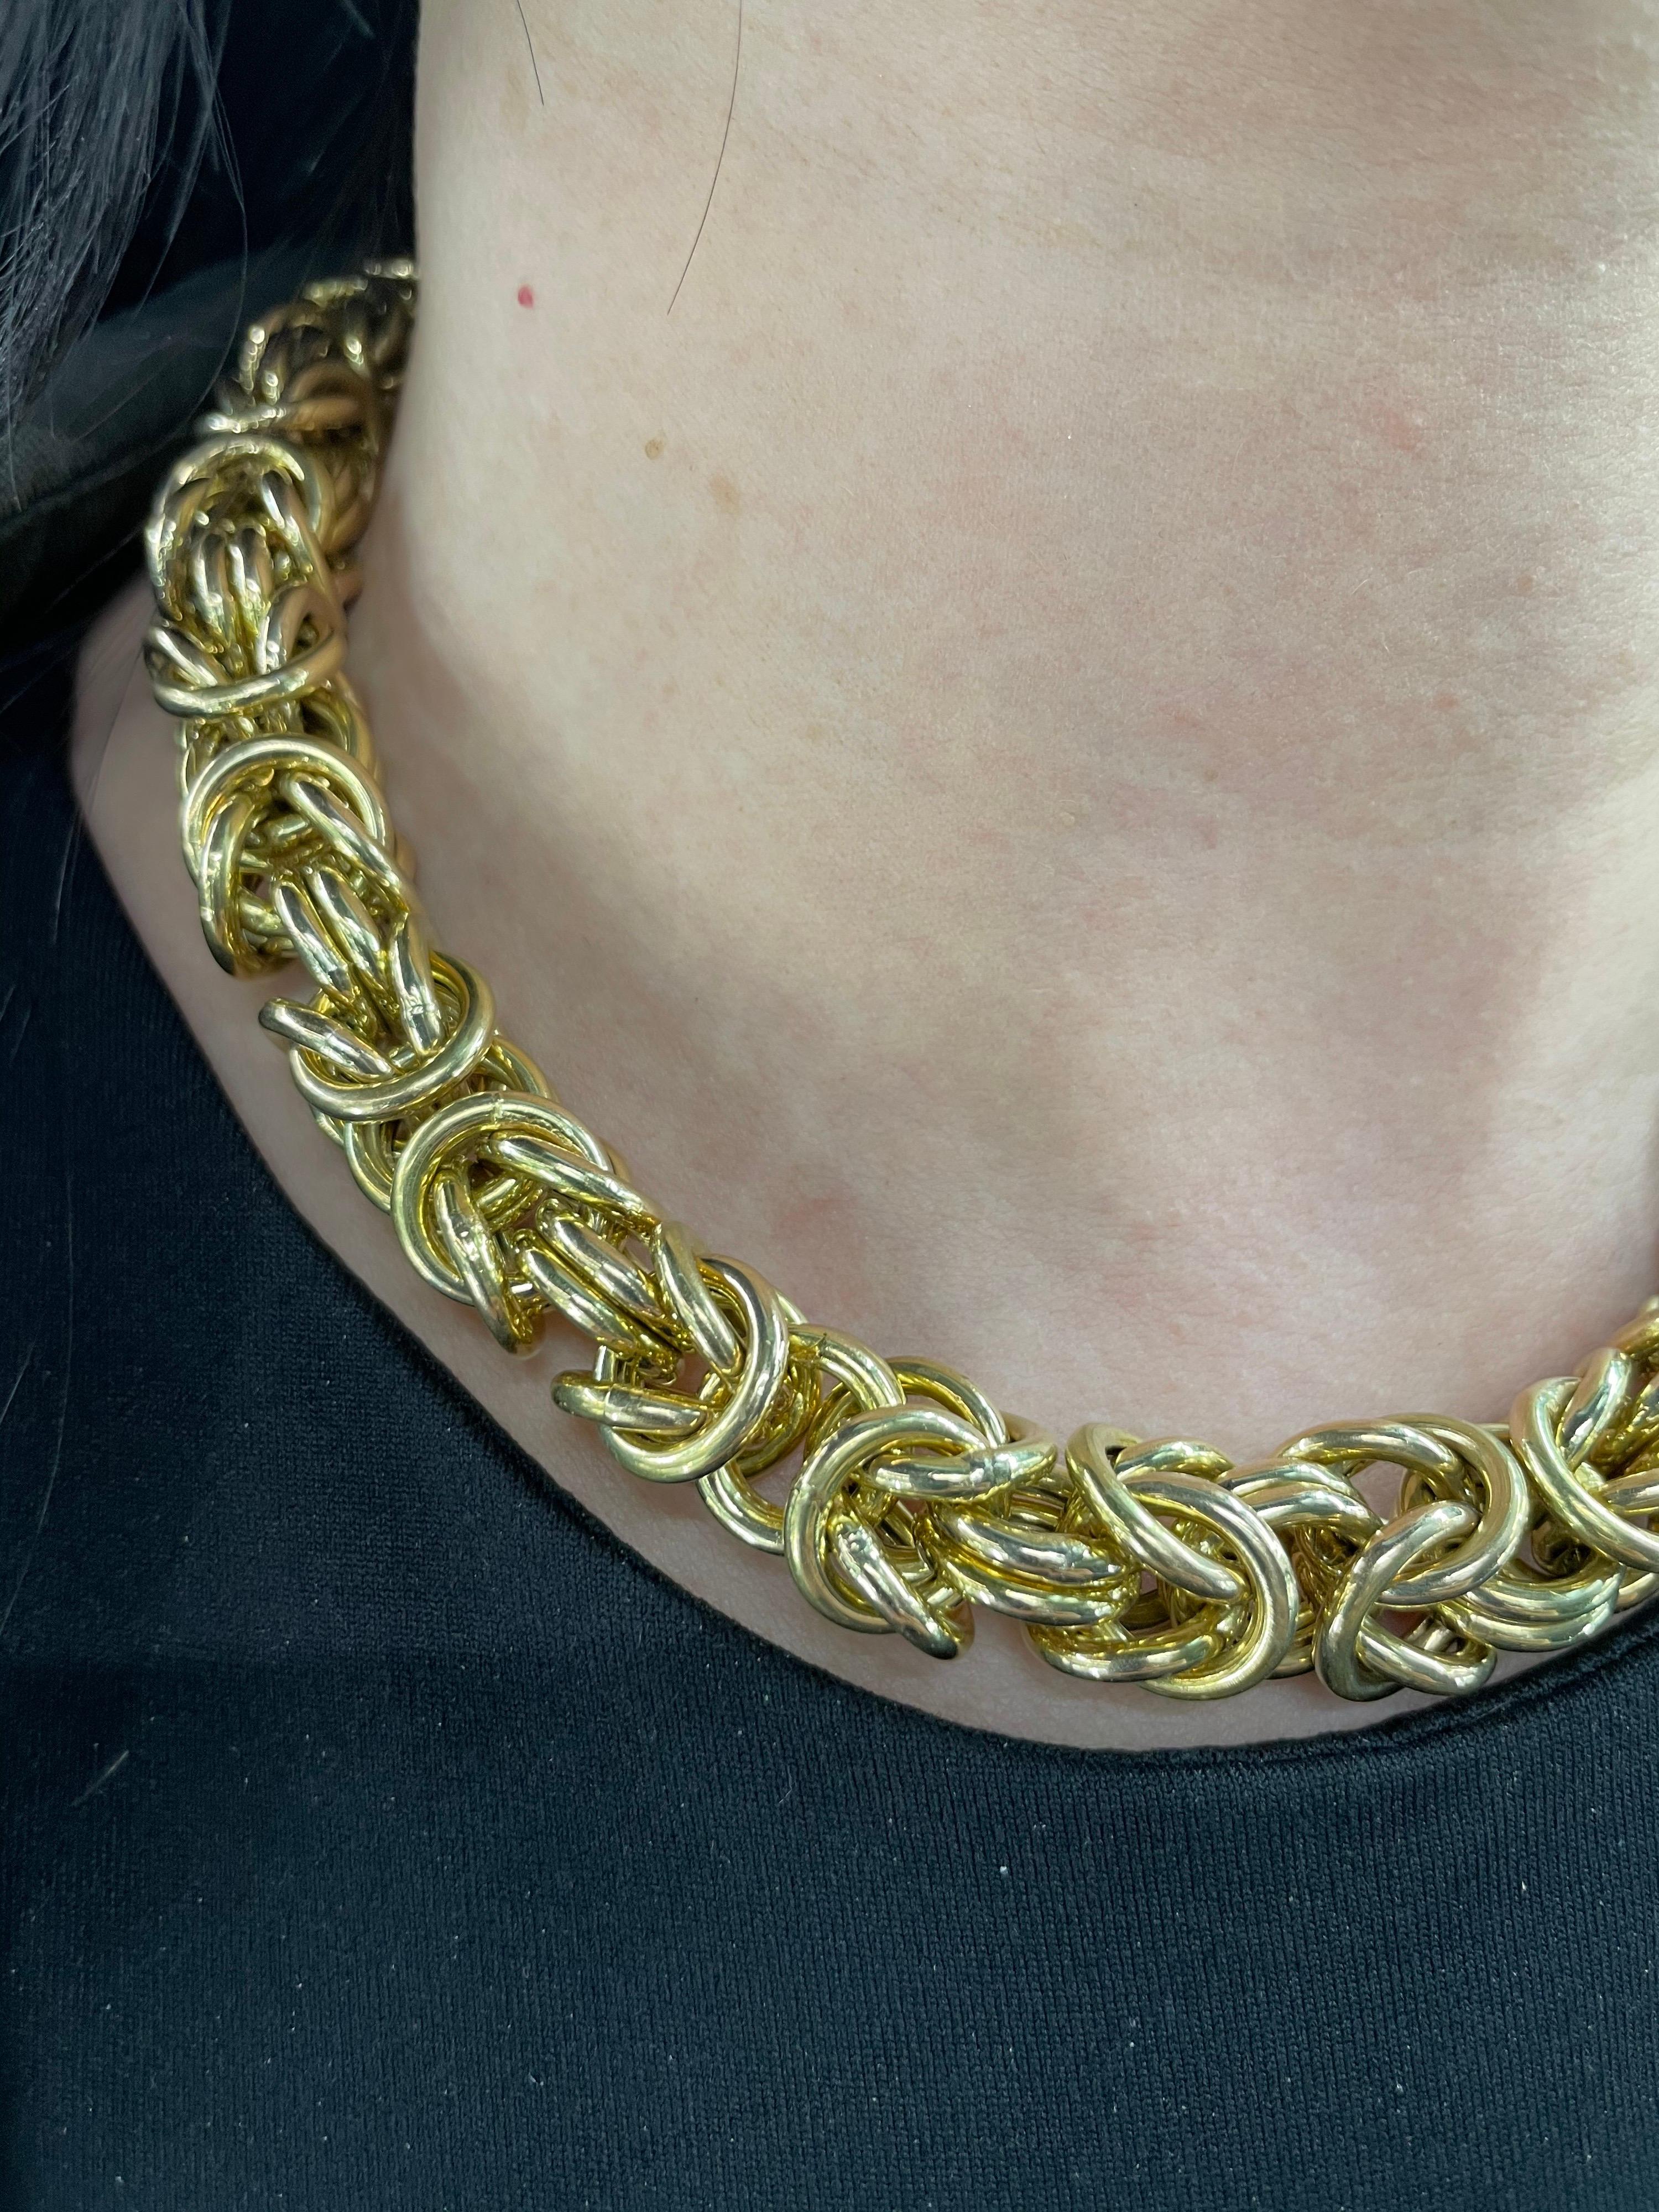 14 Karat Yellow Gold Byzantine Style Necklace 105.6 Grams In Excellent Condition For Sale In New York, NY